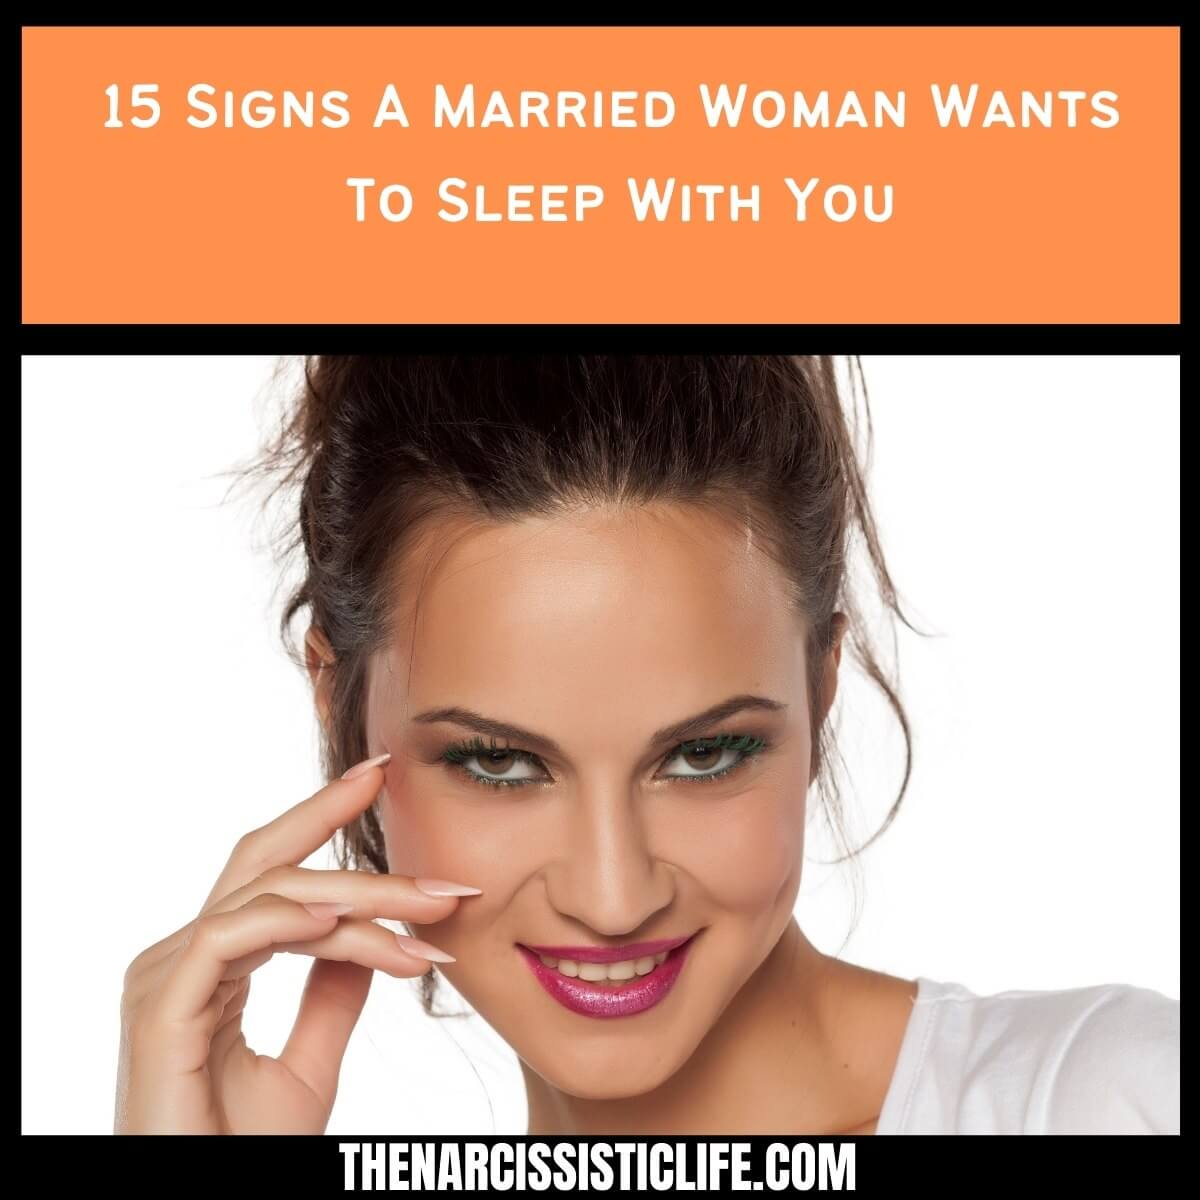 15 Signs A Married Woman Wants To Sleep With You